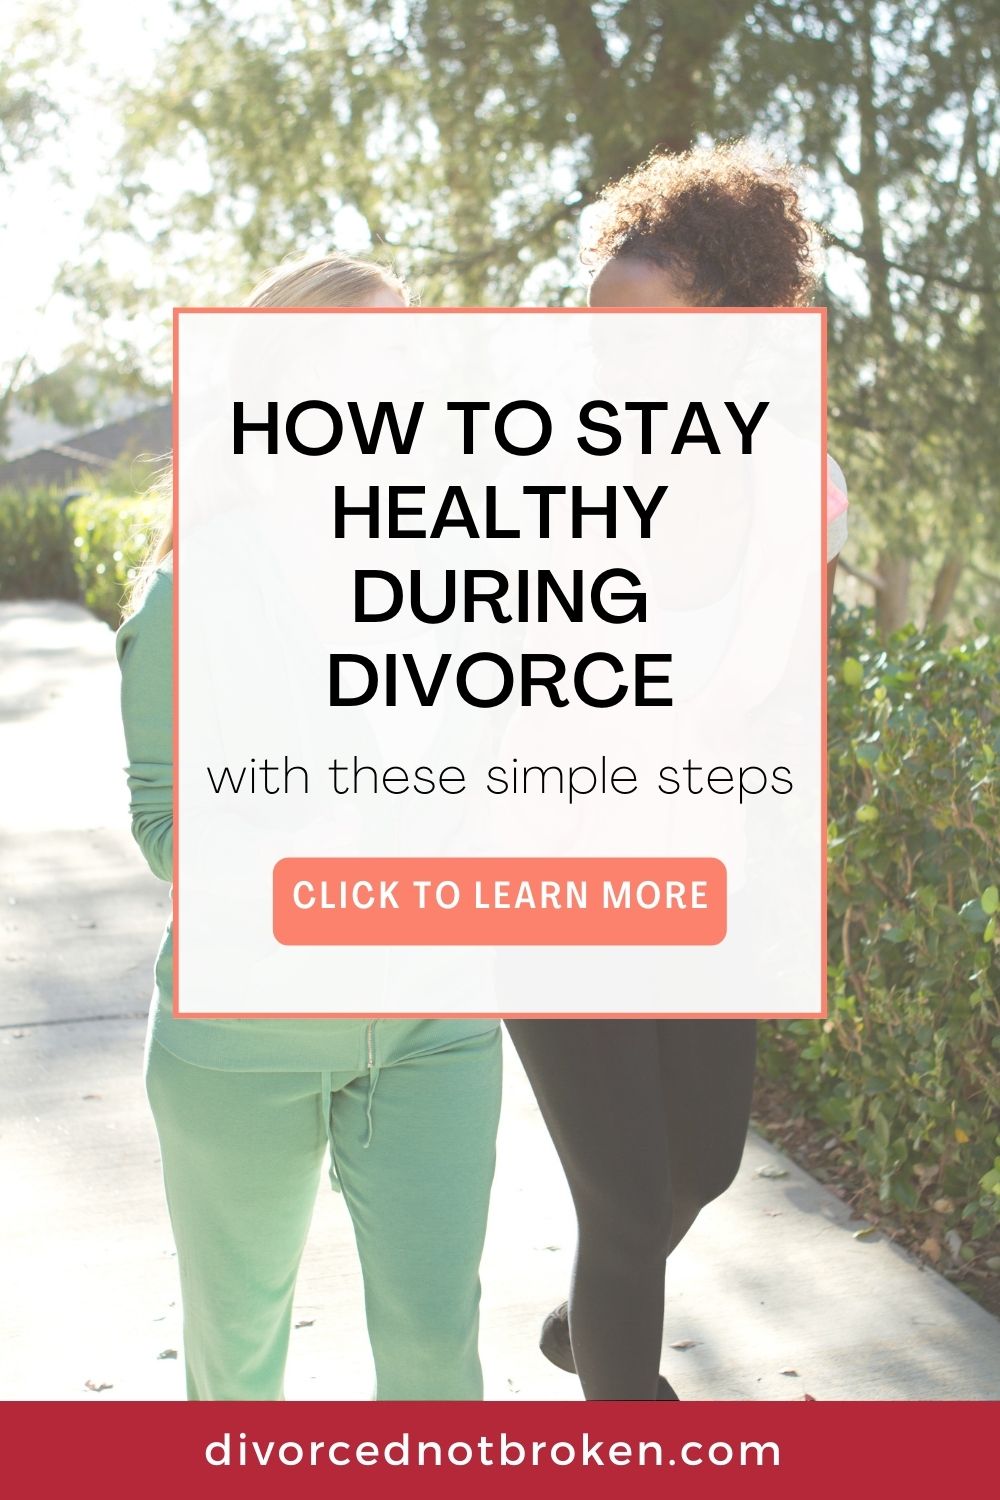 How to Stay Healthy During Divorce title graphic overlay with two woman walking in the background.